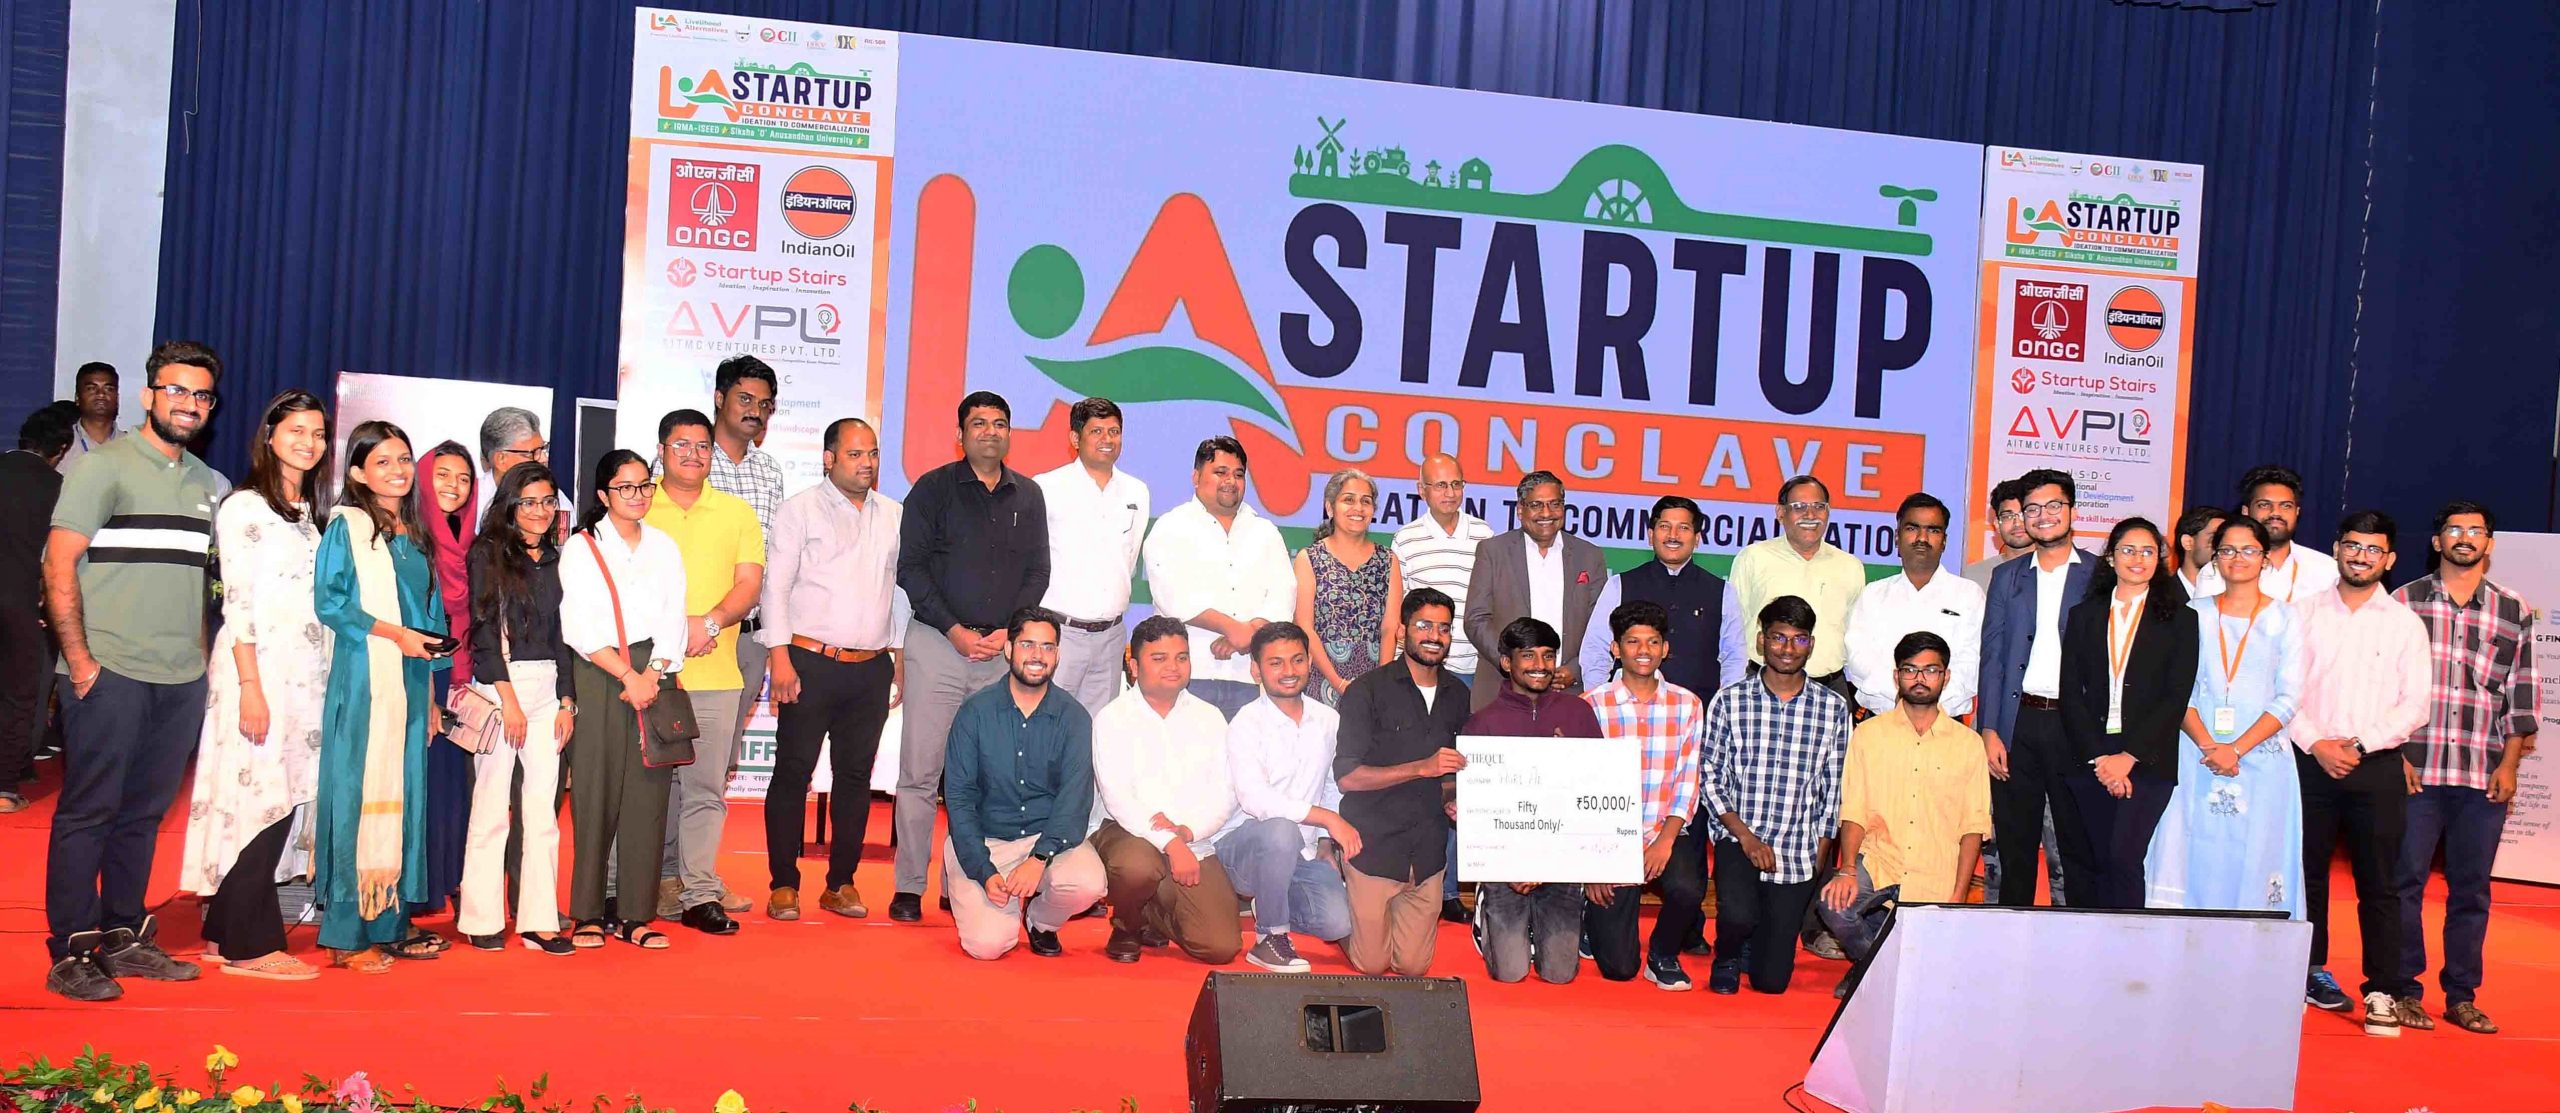 TWO DAY STARTUP CONCLAVE CONCLUDES